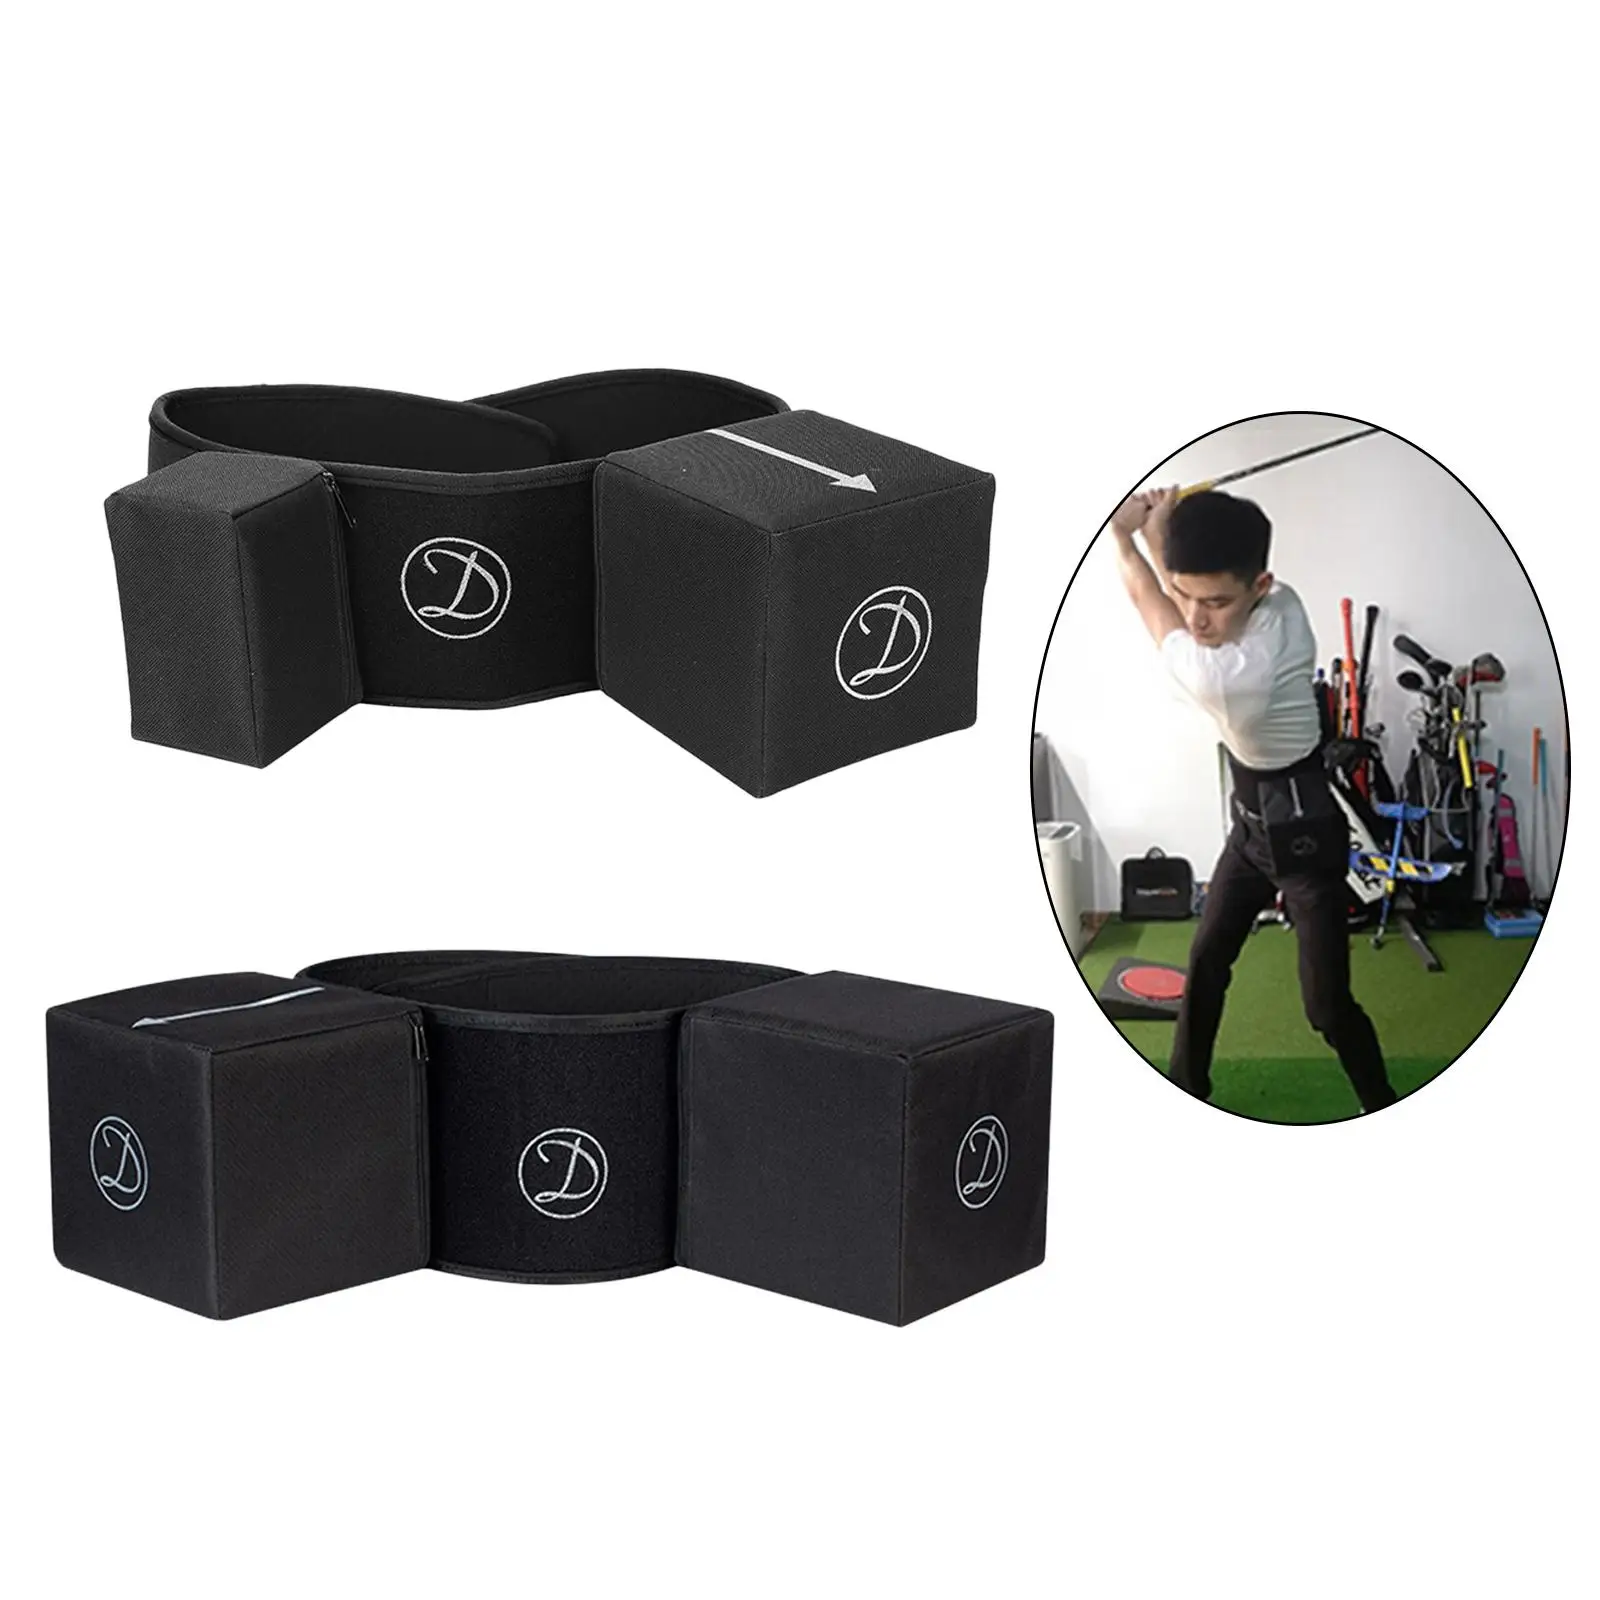 Golf Swing Training Aid, Waist Support, Posture Corrector Tool, Gesture , Aid Guide for